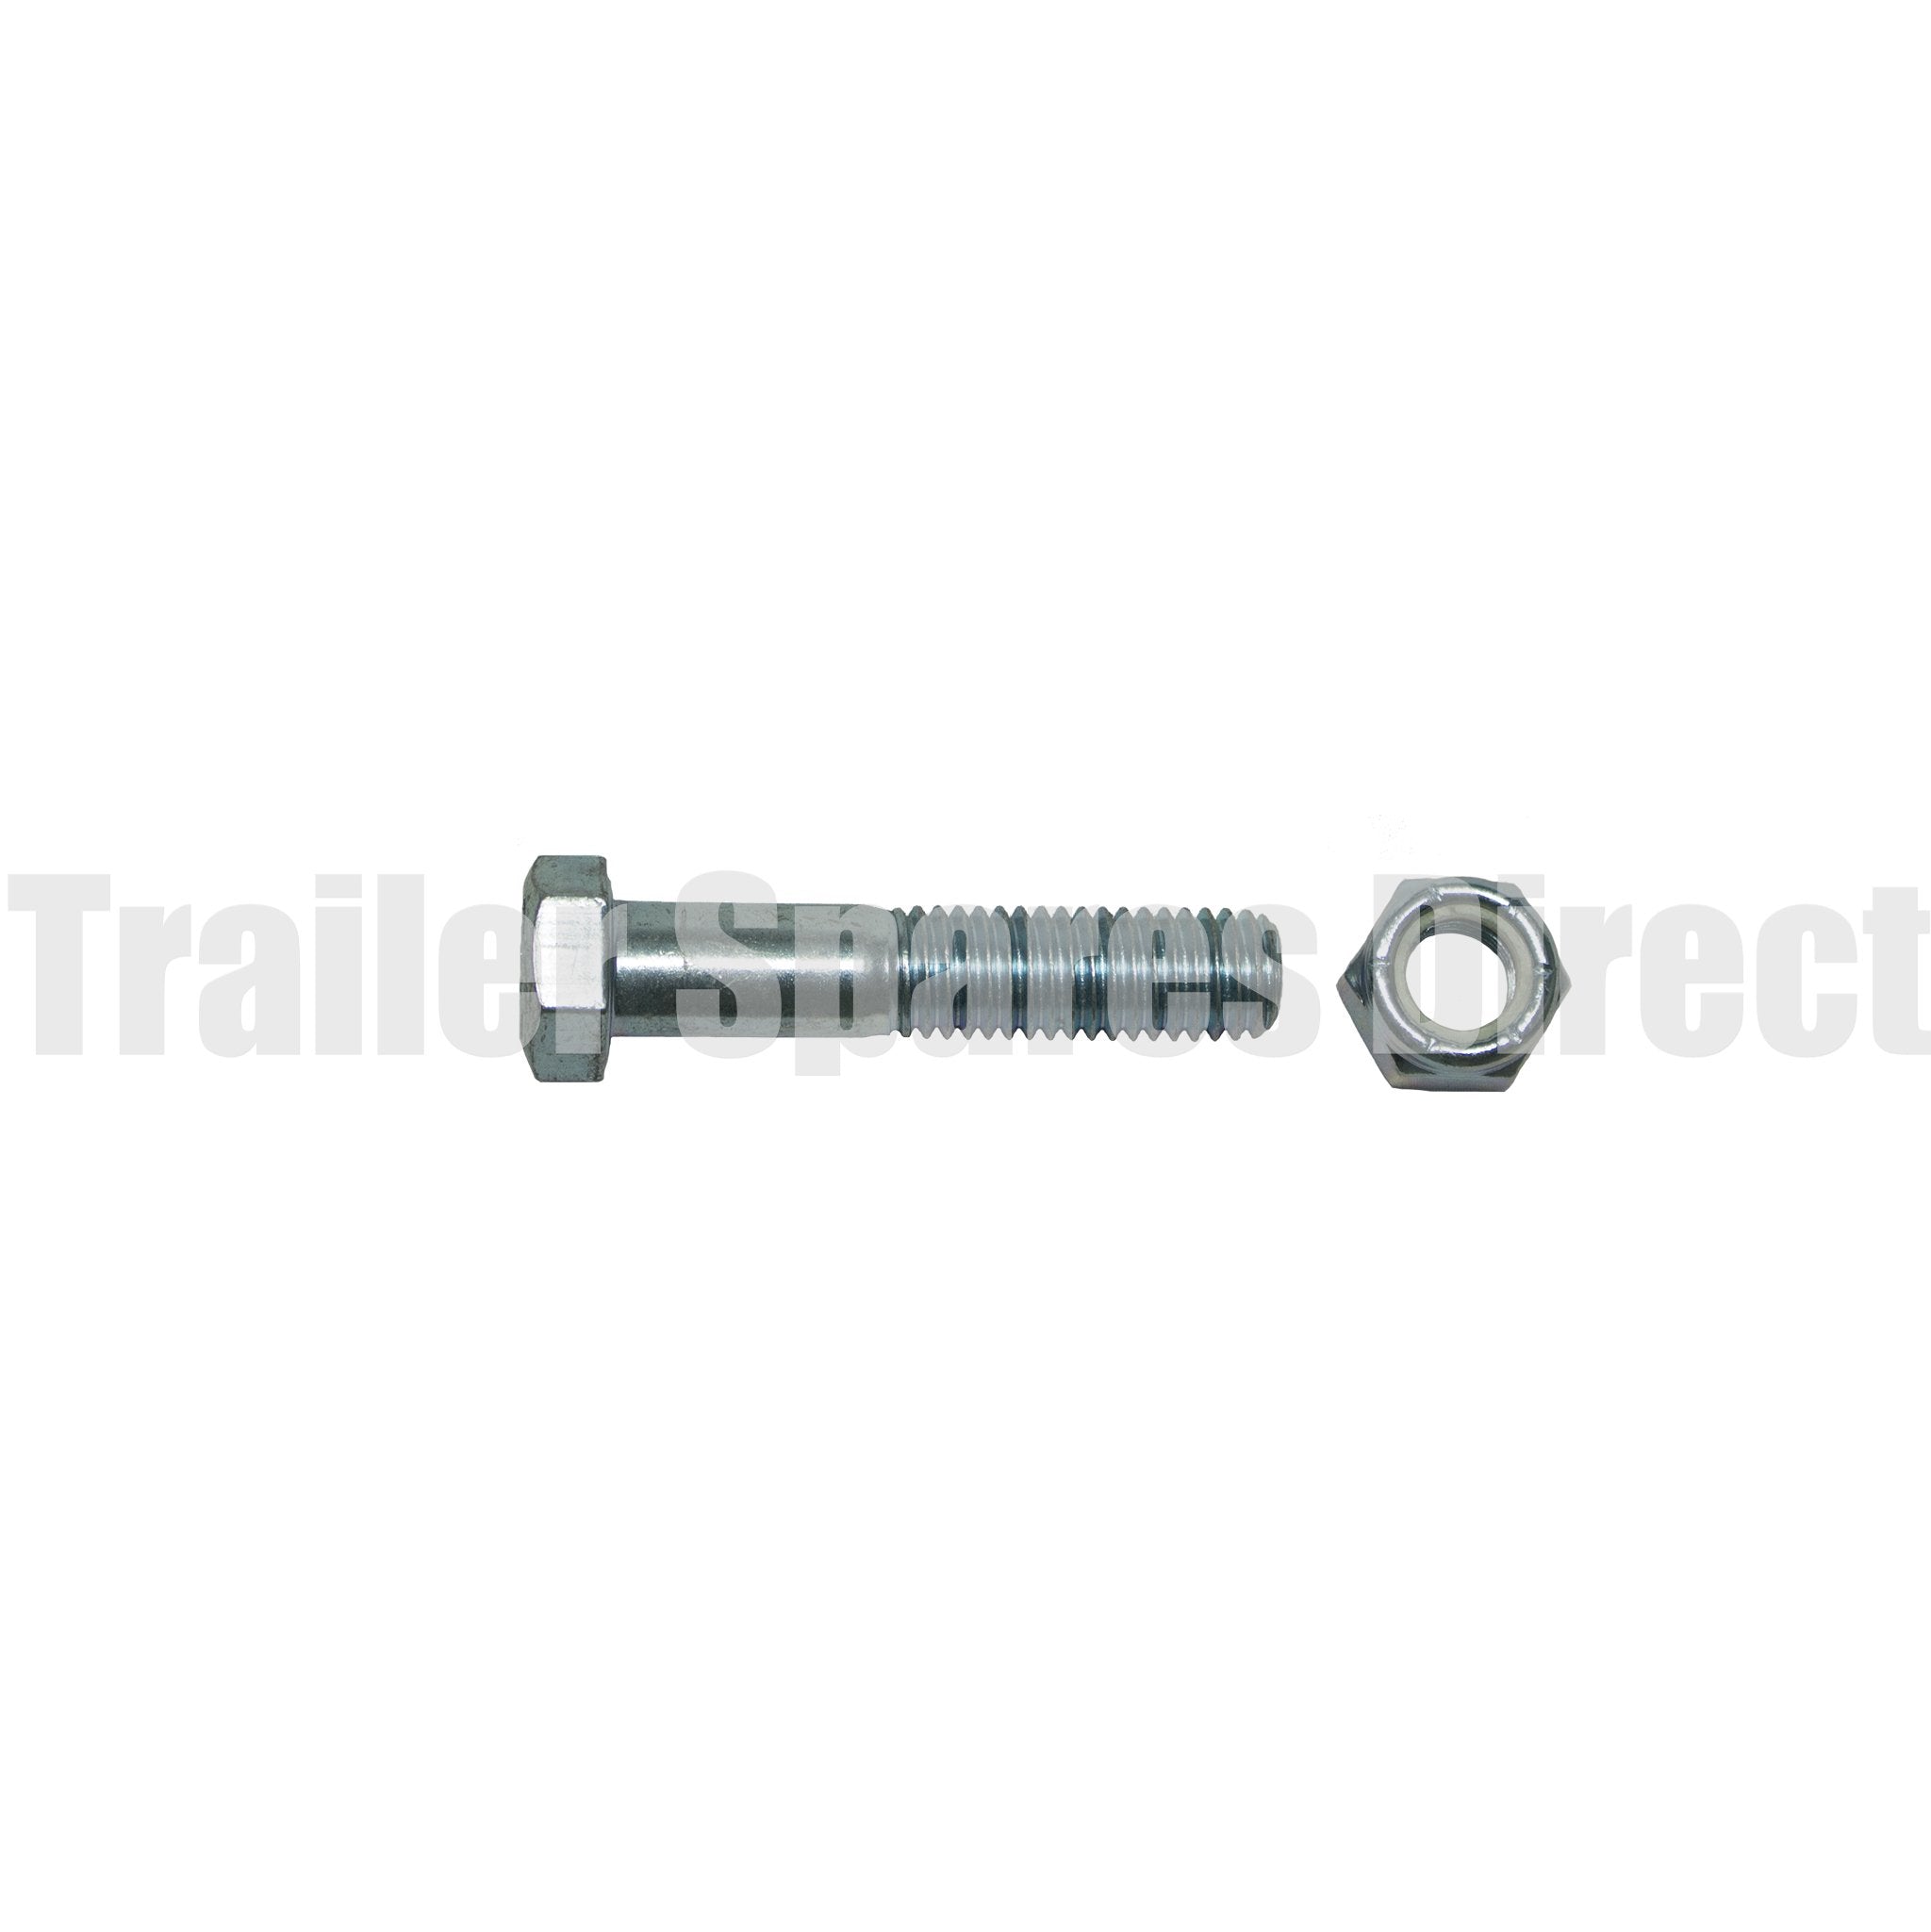 Coupling bolt 2.5 inch